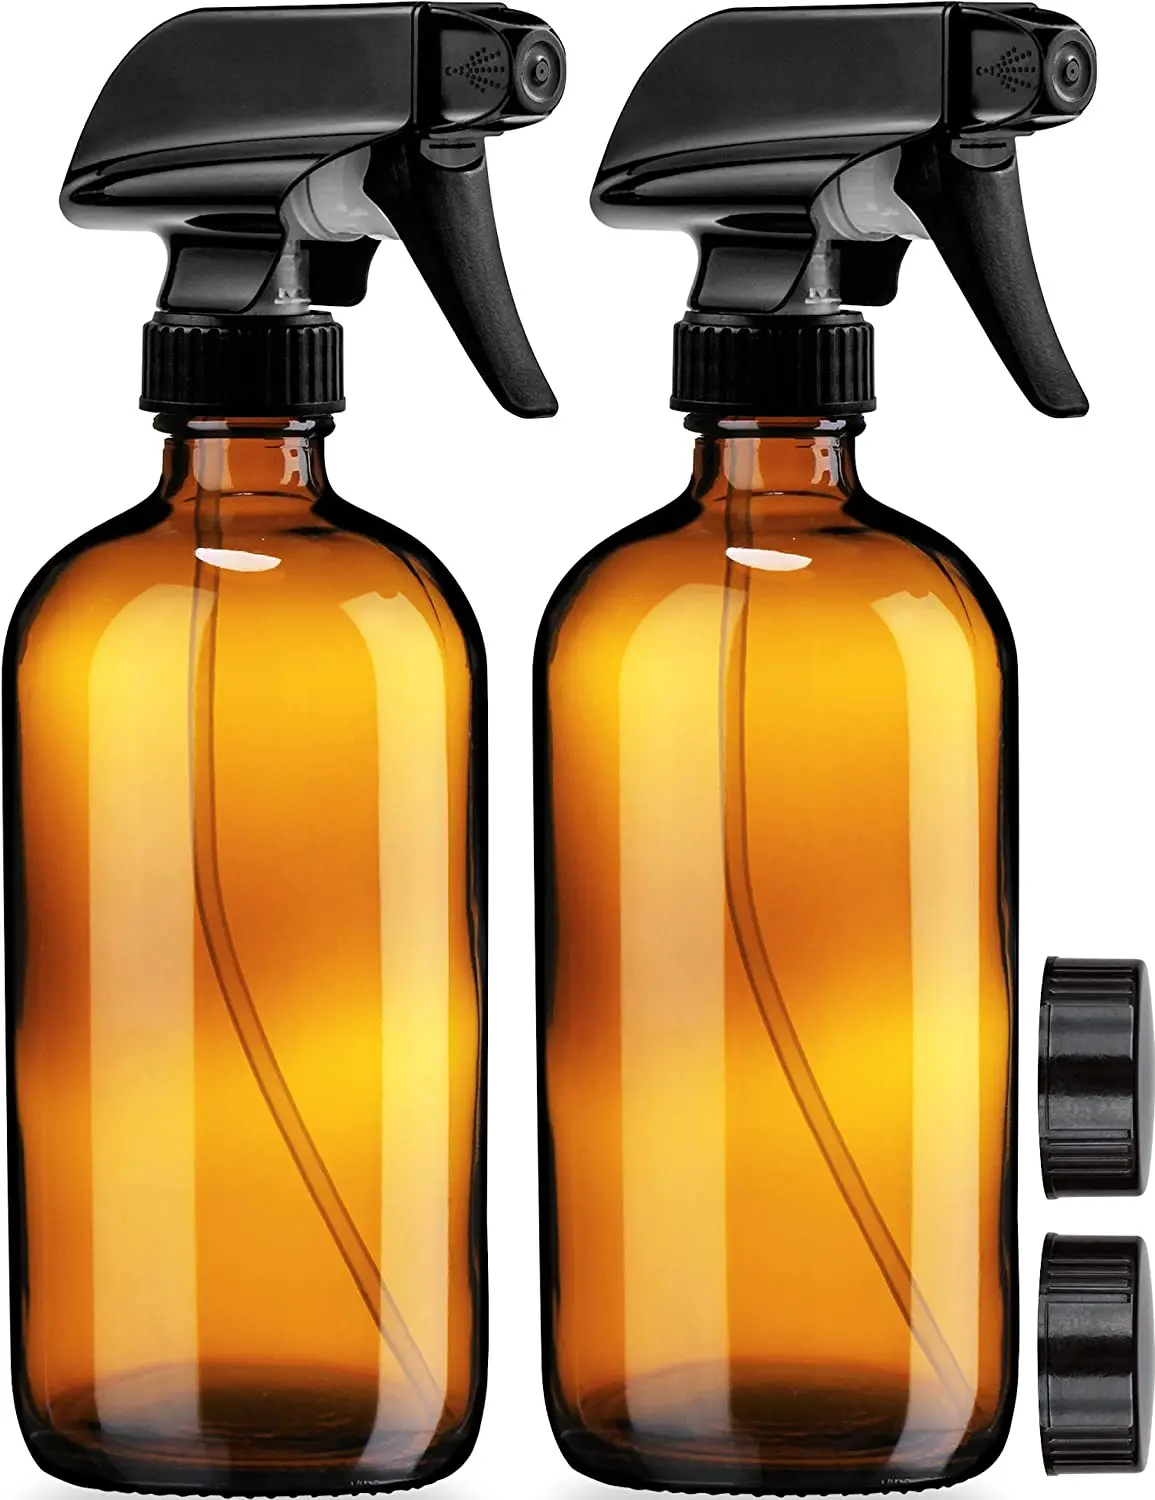 

2pcs Empty Amber Glass Spray Bottles 16oz Bottle for Essential Oils, Gardening, Cleaning Solutions, Plants ,and Hair Misting